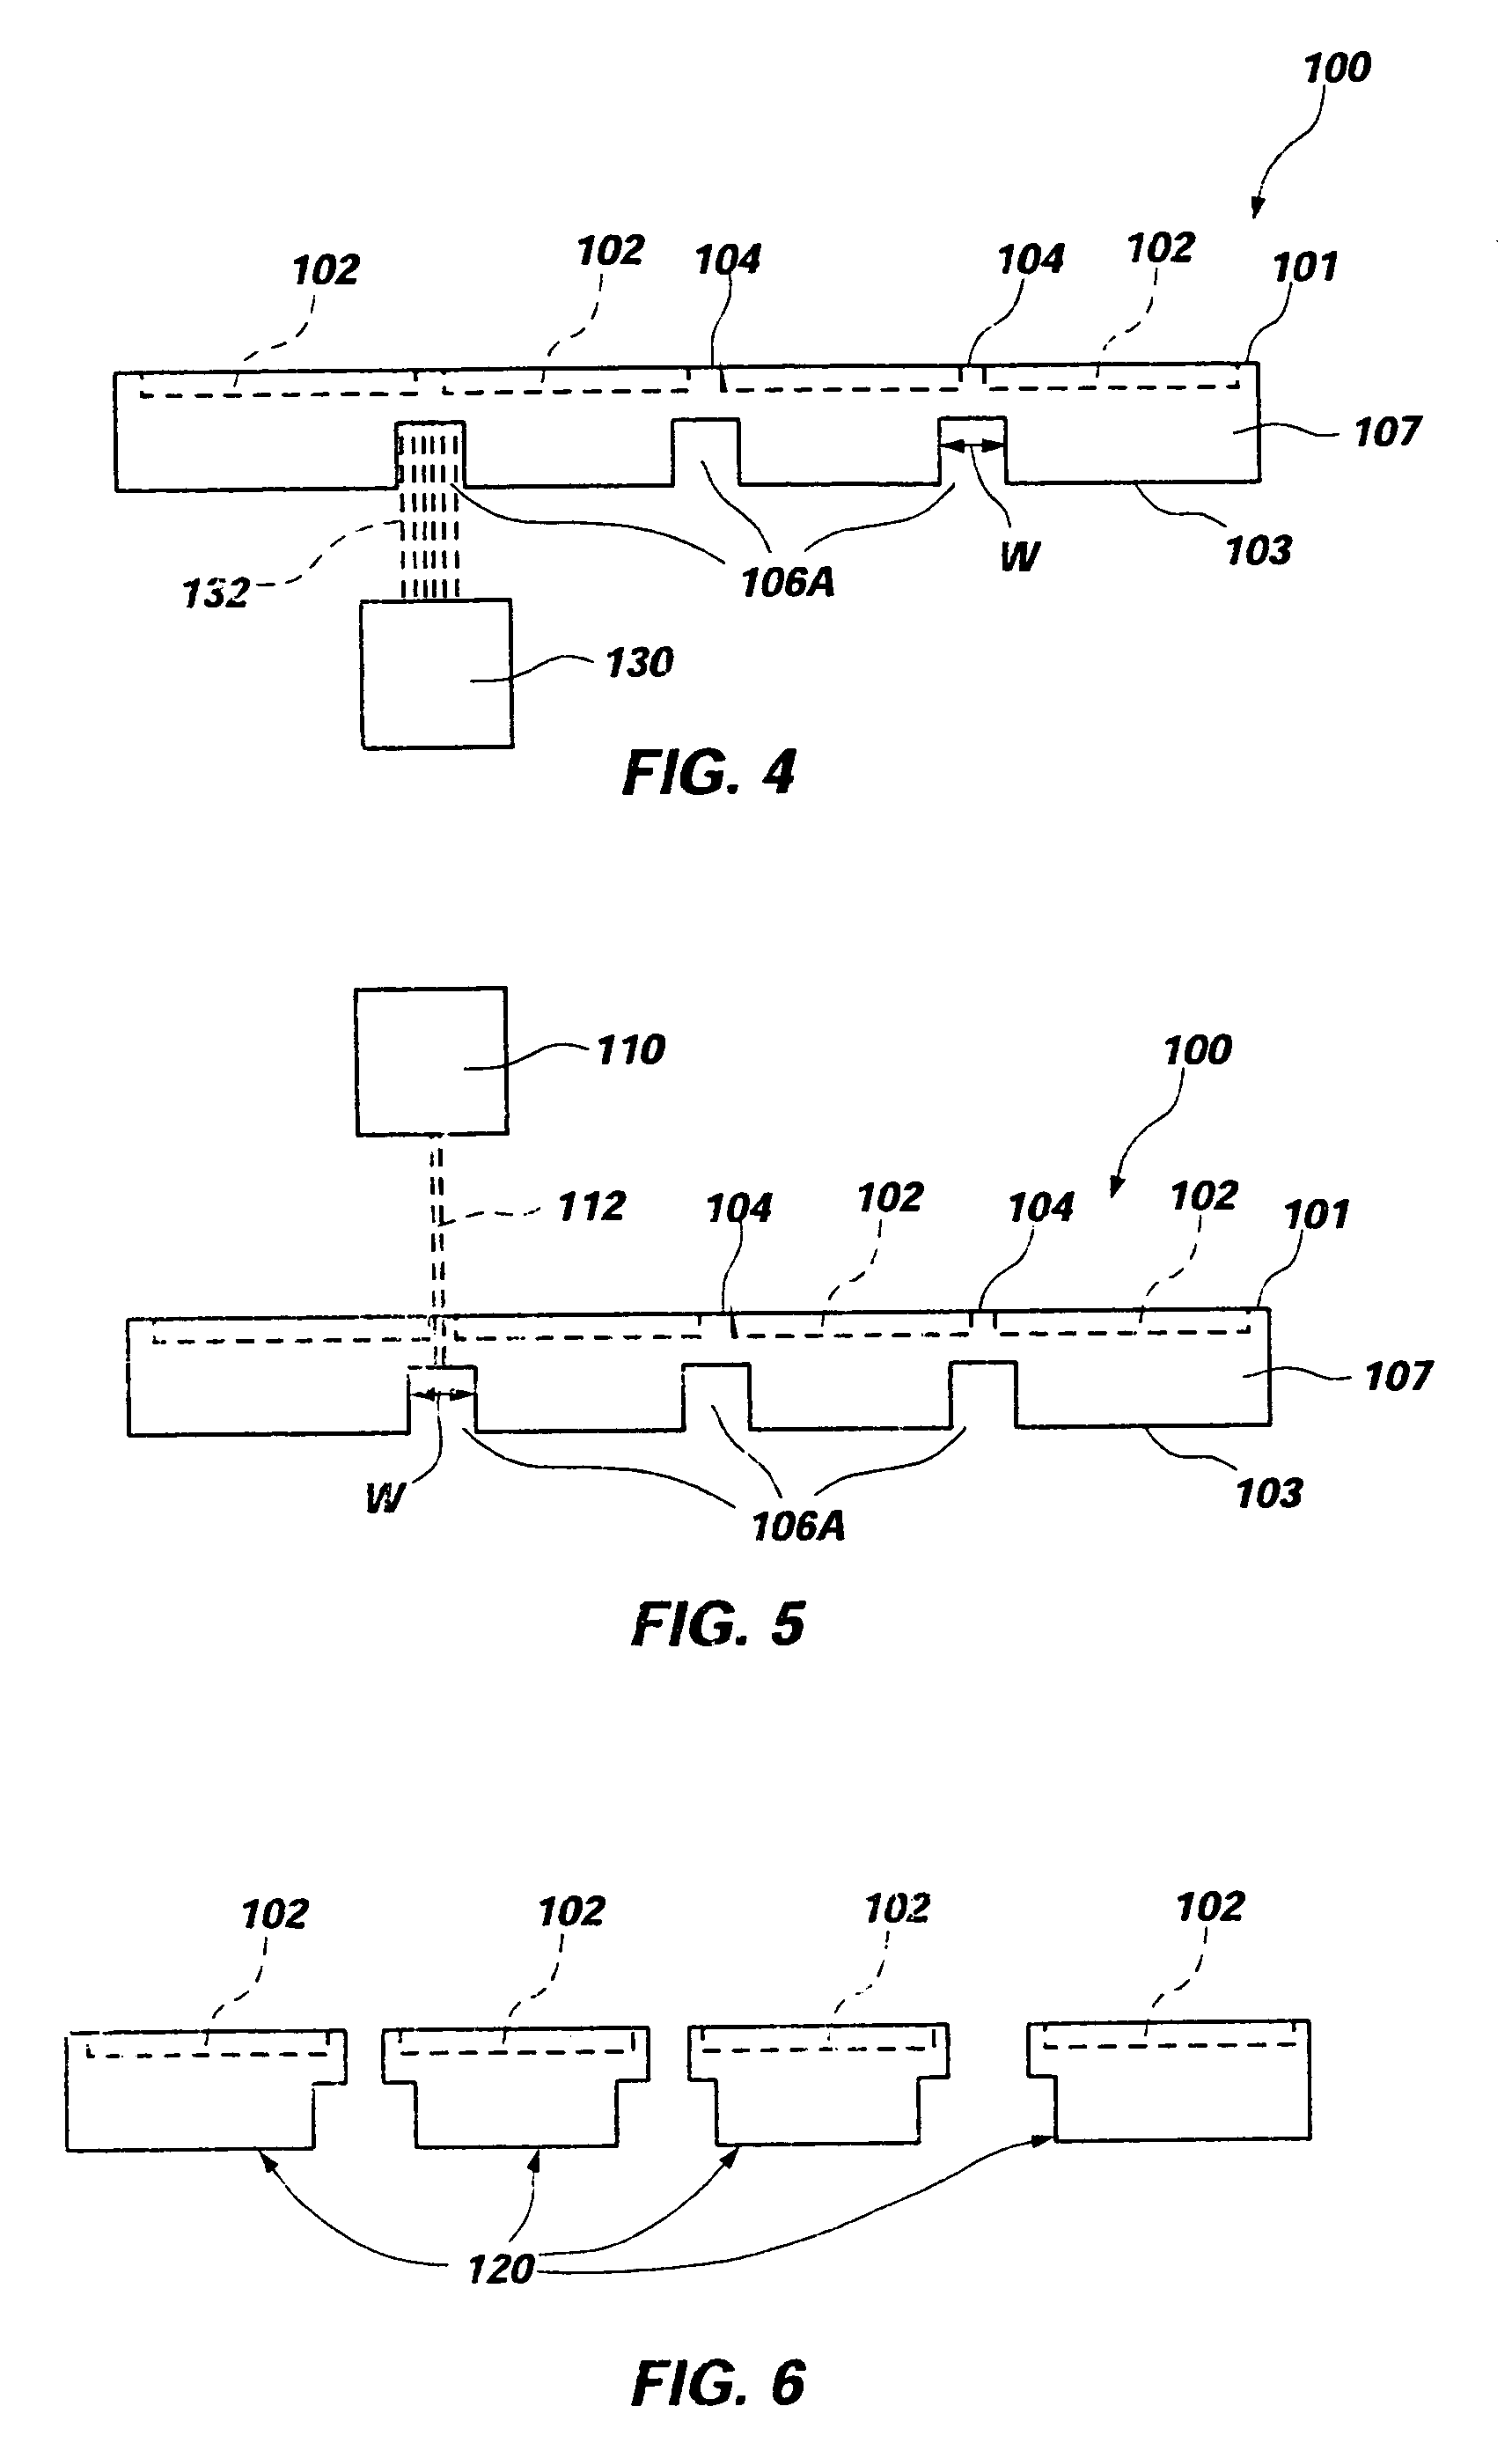 Methods relating to singulating semiconductor wafers and wafer scale assemblies